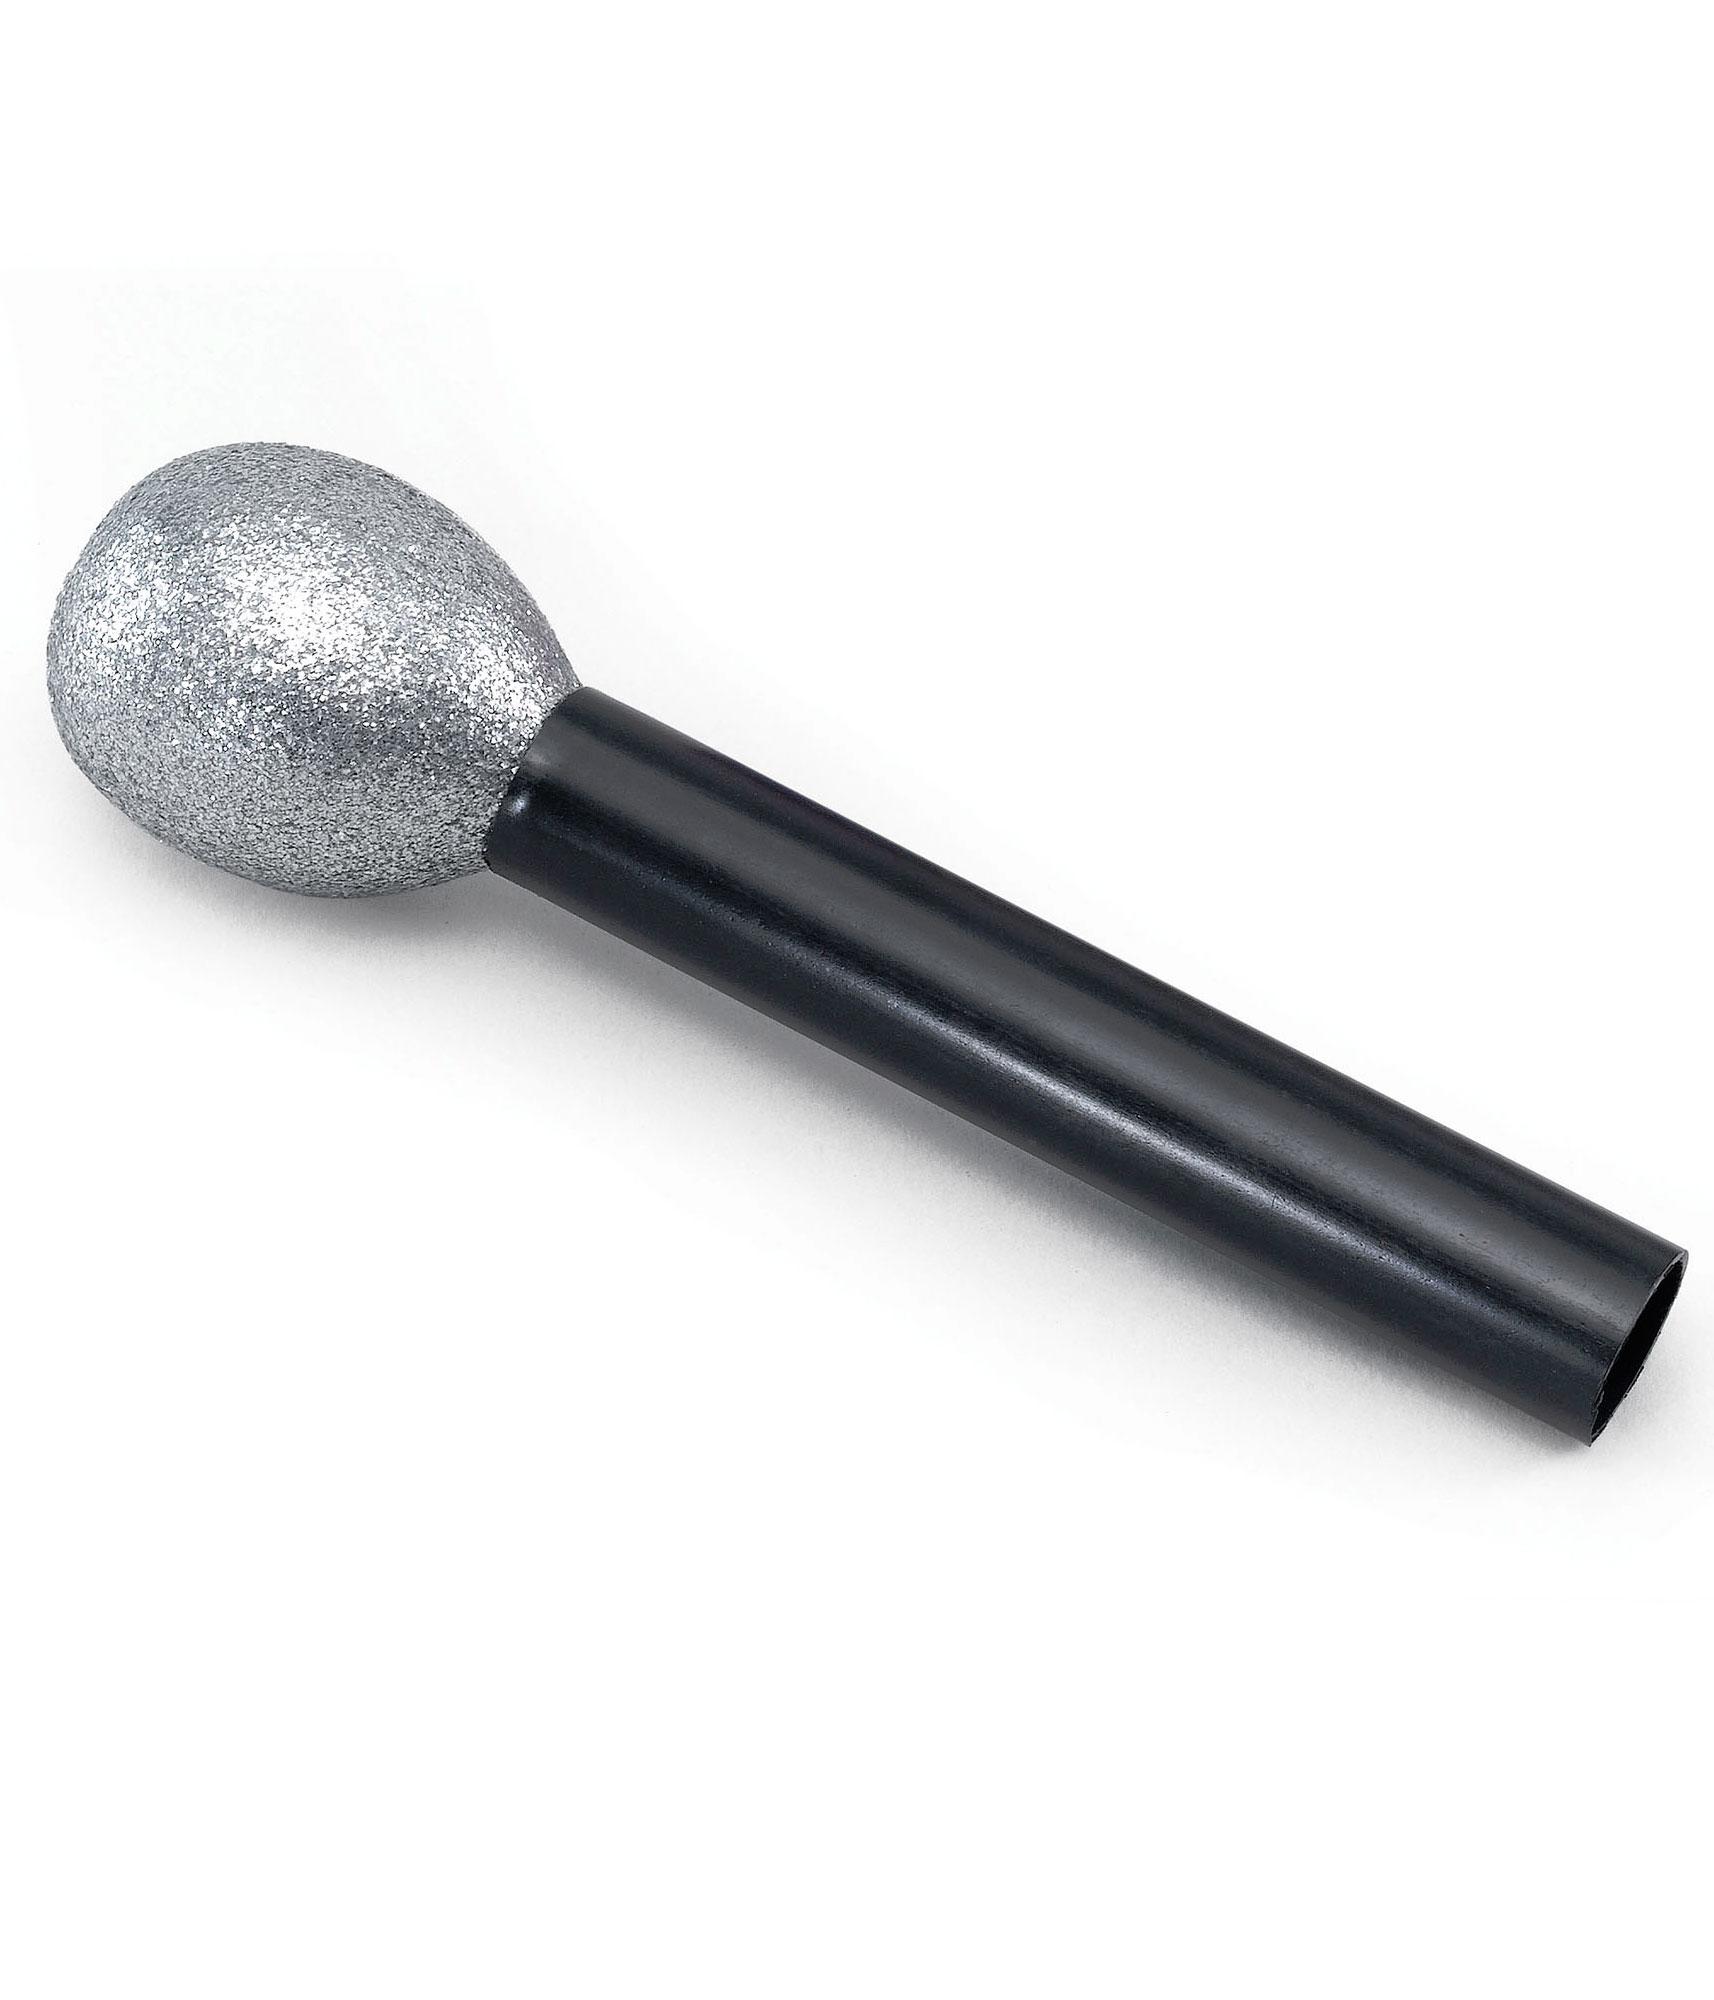 Microphone costume accessory by Rubies 2185 & B Novs BA852 available here at Karnival Costumes online party shop